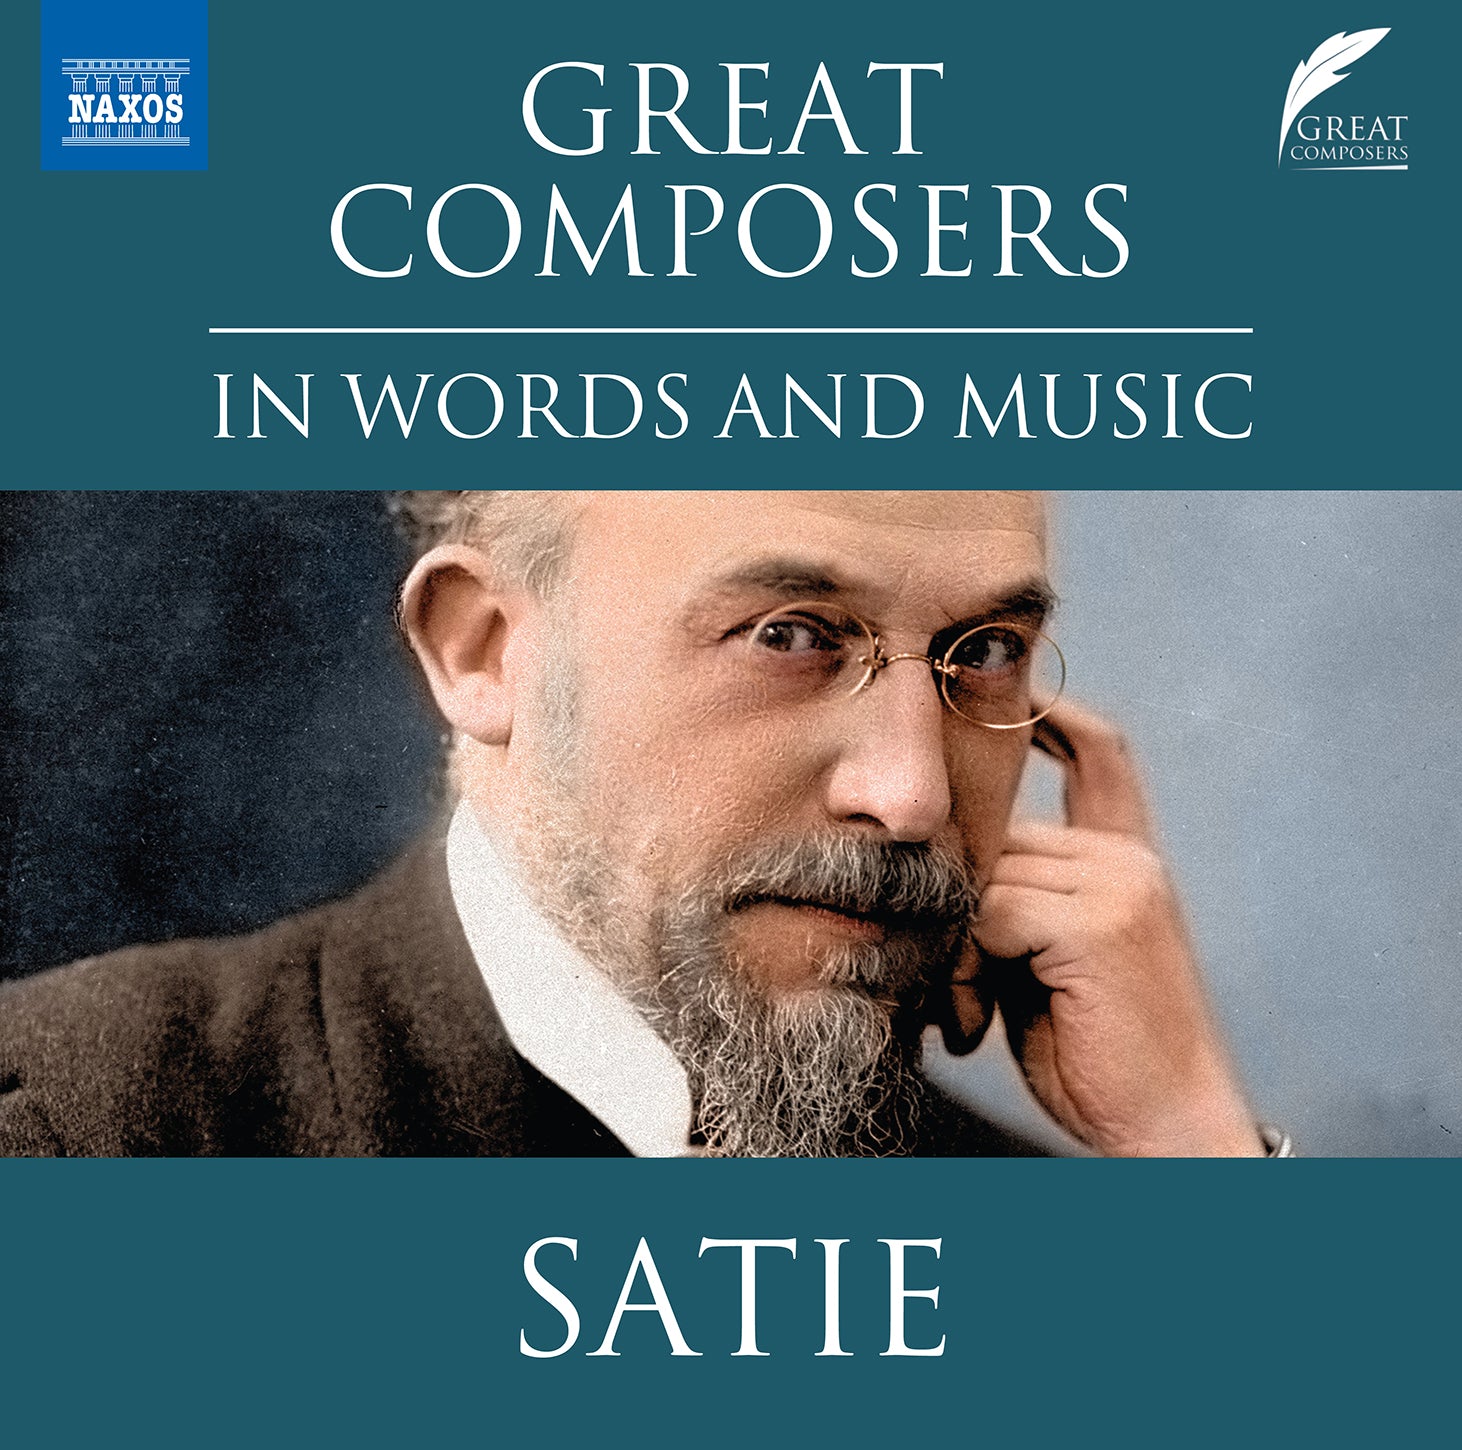 Satie: Great Composers in Words & Music